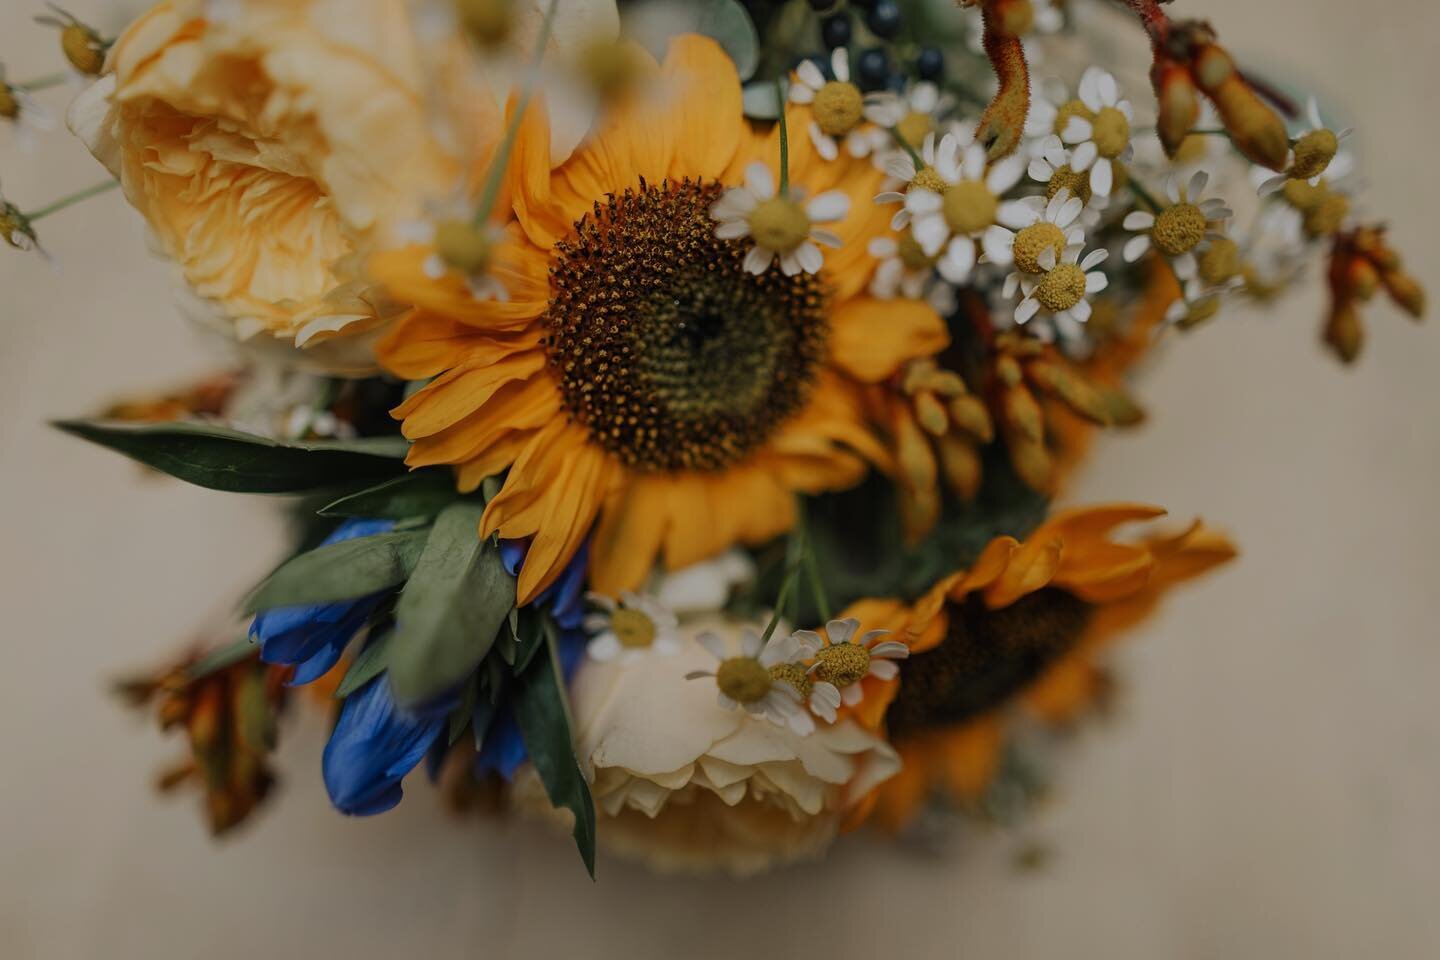 h+b - the wild summer flower vibes. It made me feel like they were scooped up from a wildflower field the morning of 😍 #flowers #weddingflowers #weddingphotography #happy #feelgood